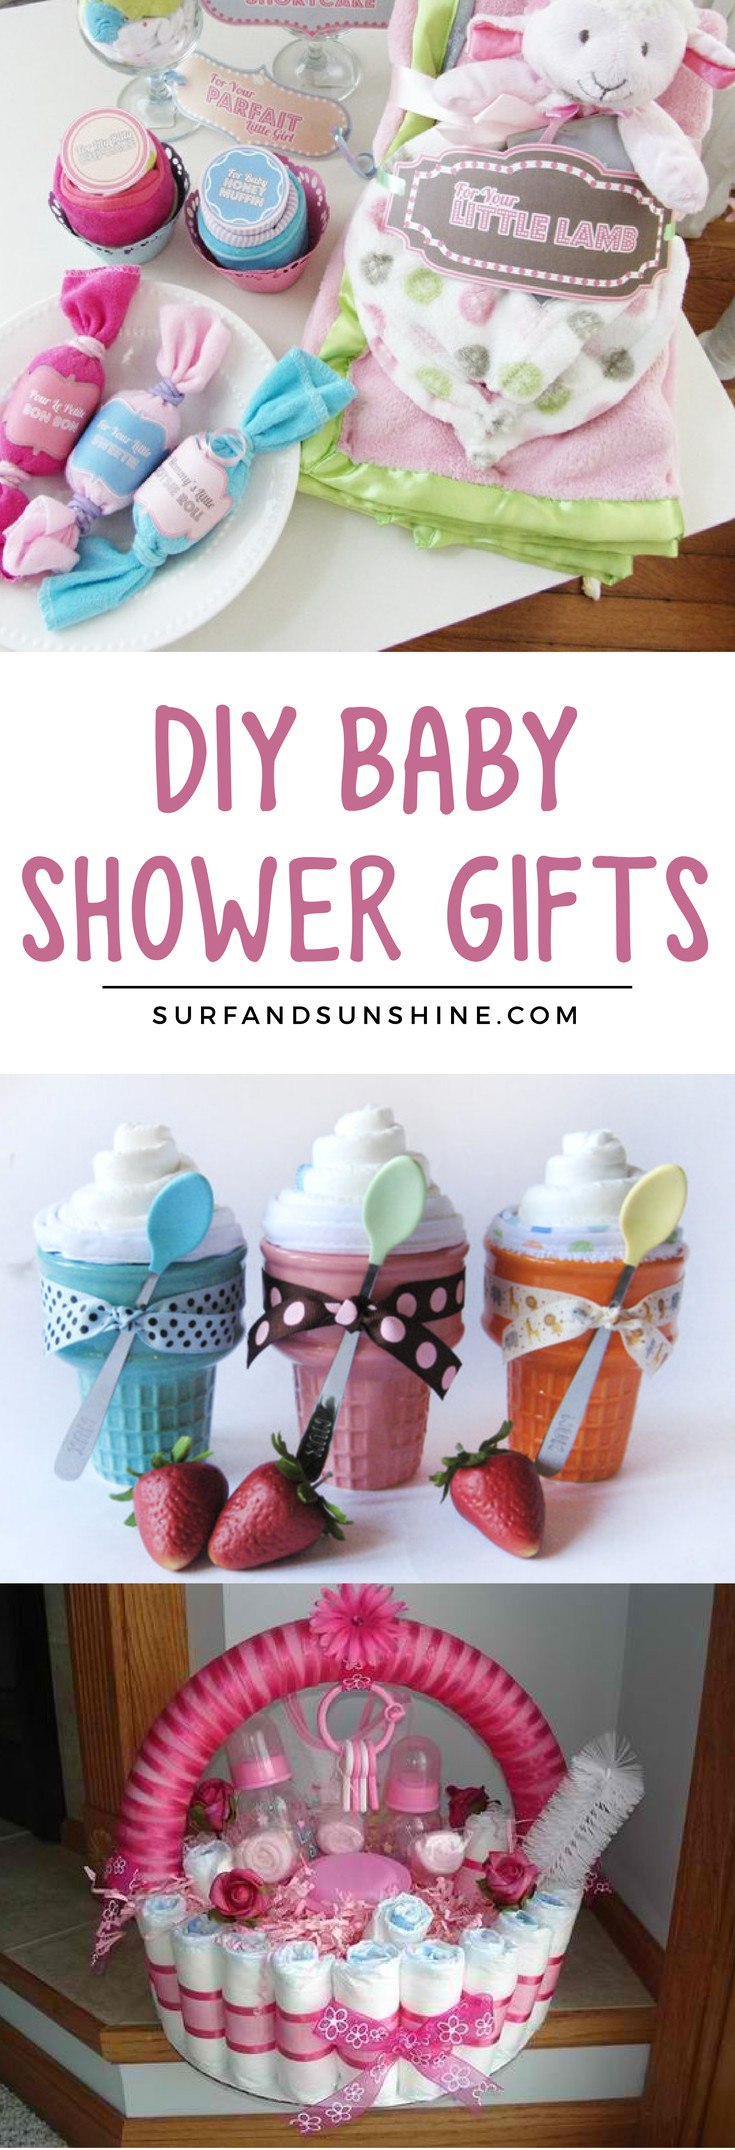 DIY Baby Shower Gifts For Girl
 Unique DIY Baby Shower Gifts for Boys and Girls